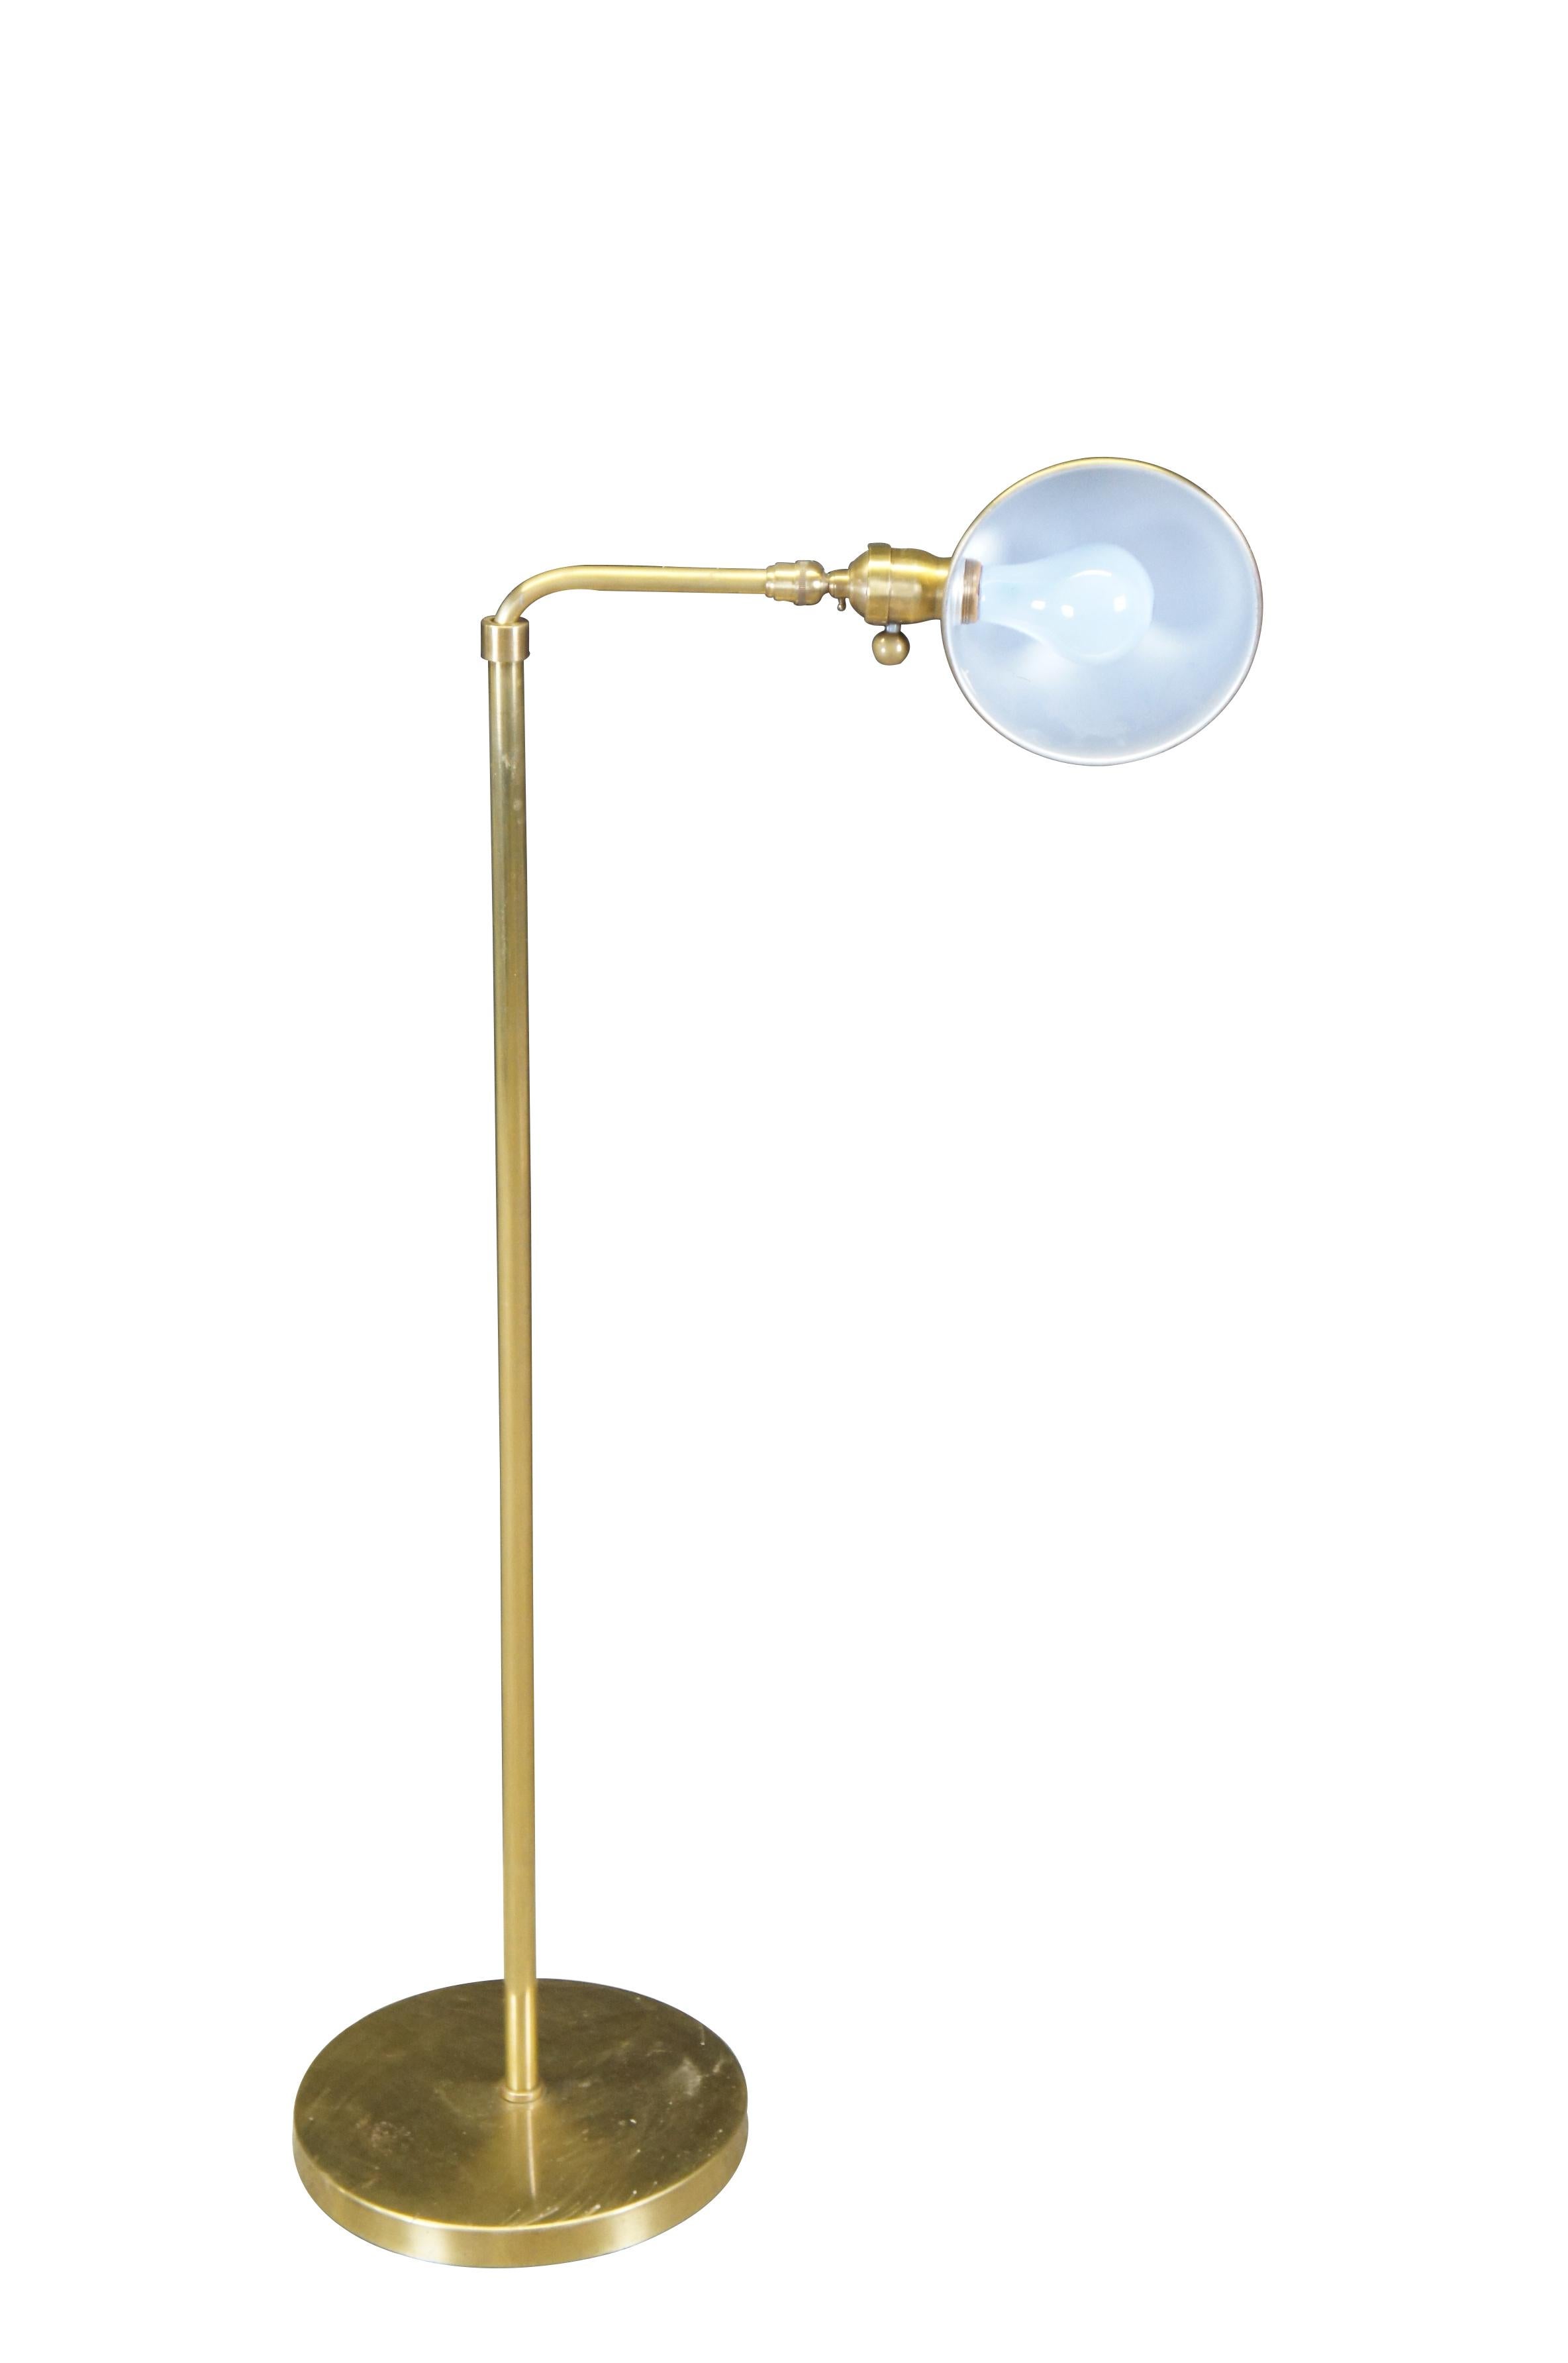 Chapman Adjustable Pharmacy lamp, circa 1990s.  Made from brass with polished finish.  Head swivels and dims.  Post adjusts from 38 - 60